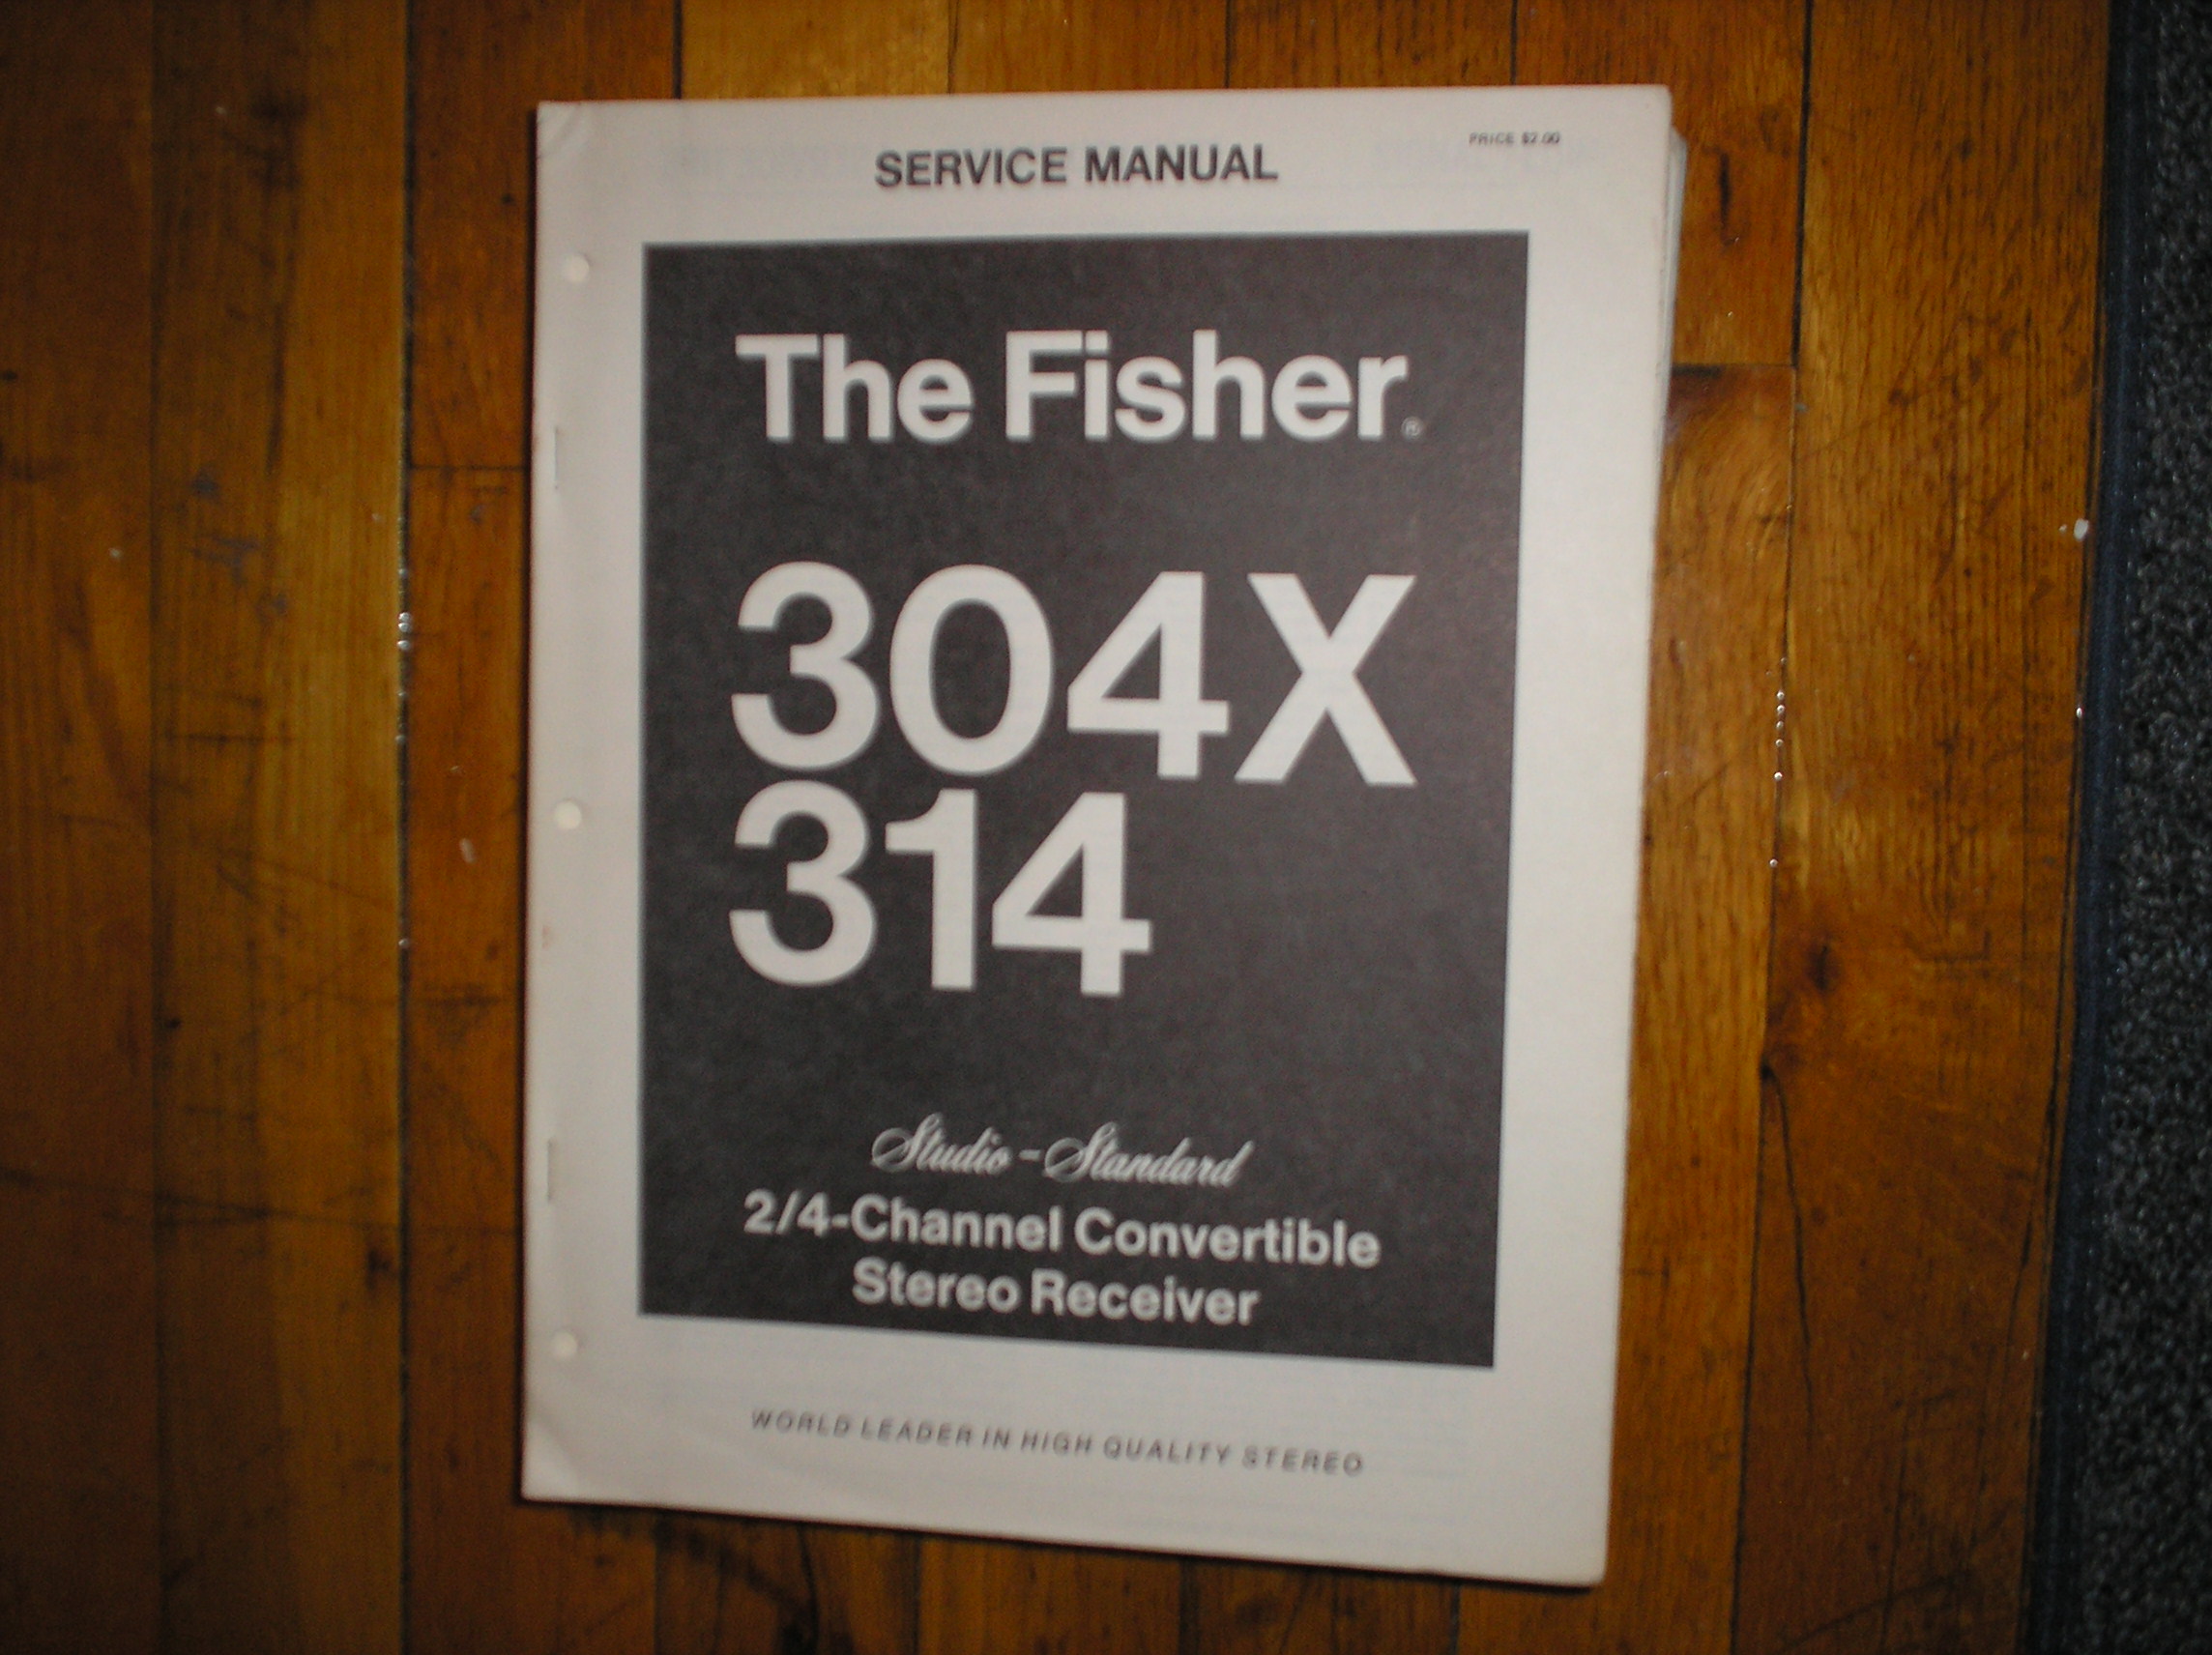 304X 314 Receiver Service Manual  Fisher